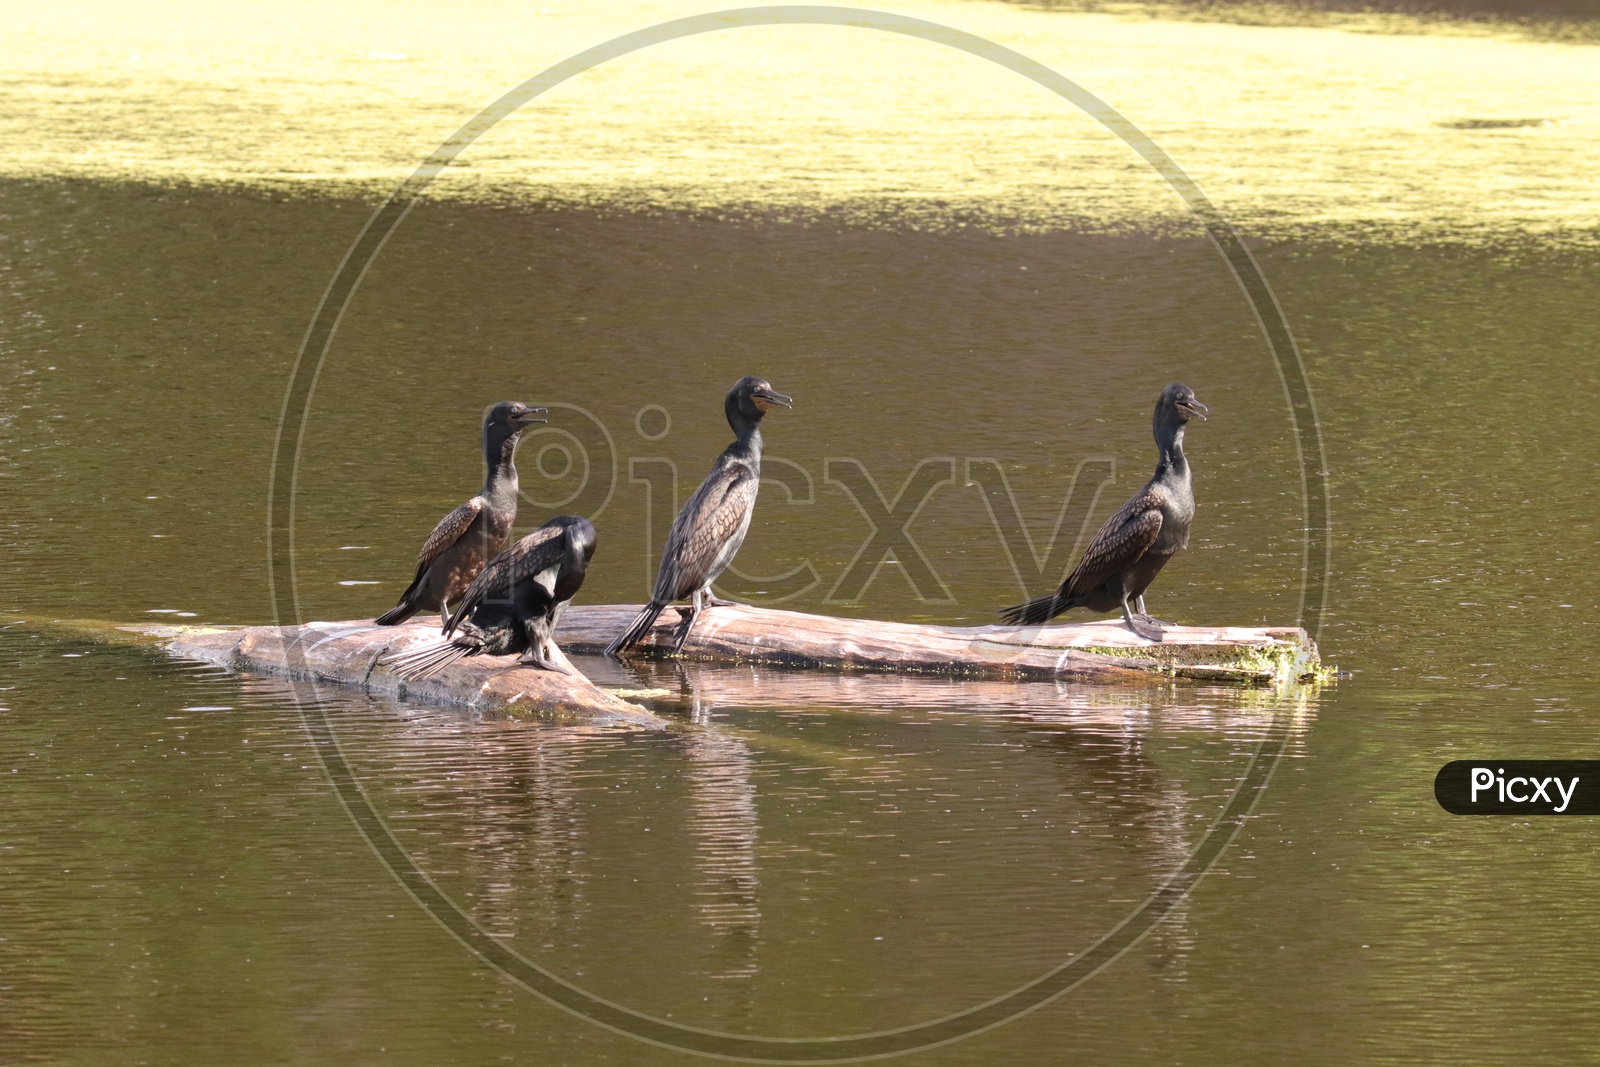 The Indian cormorant or Indian shag (Phalacrocorax fuscicollis) is a member of the cormorant family.